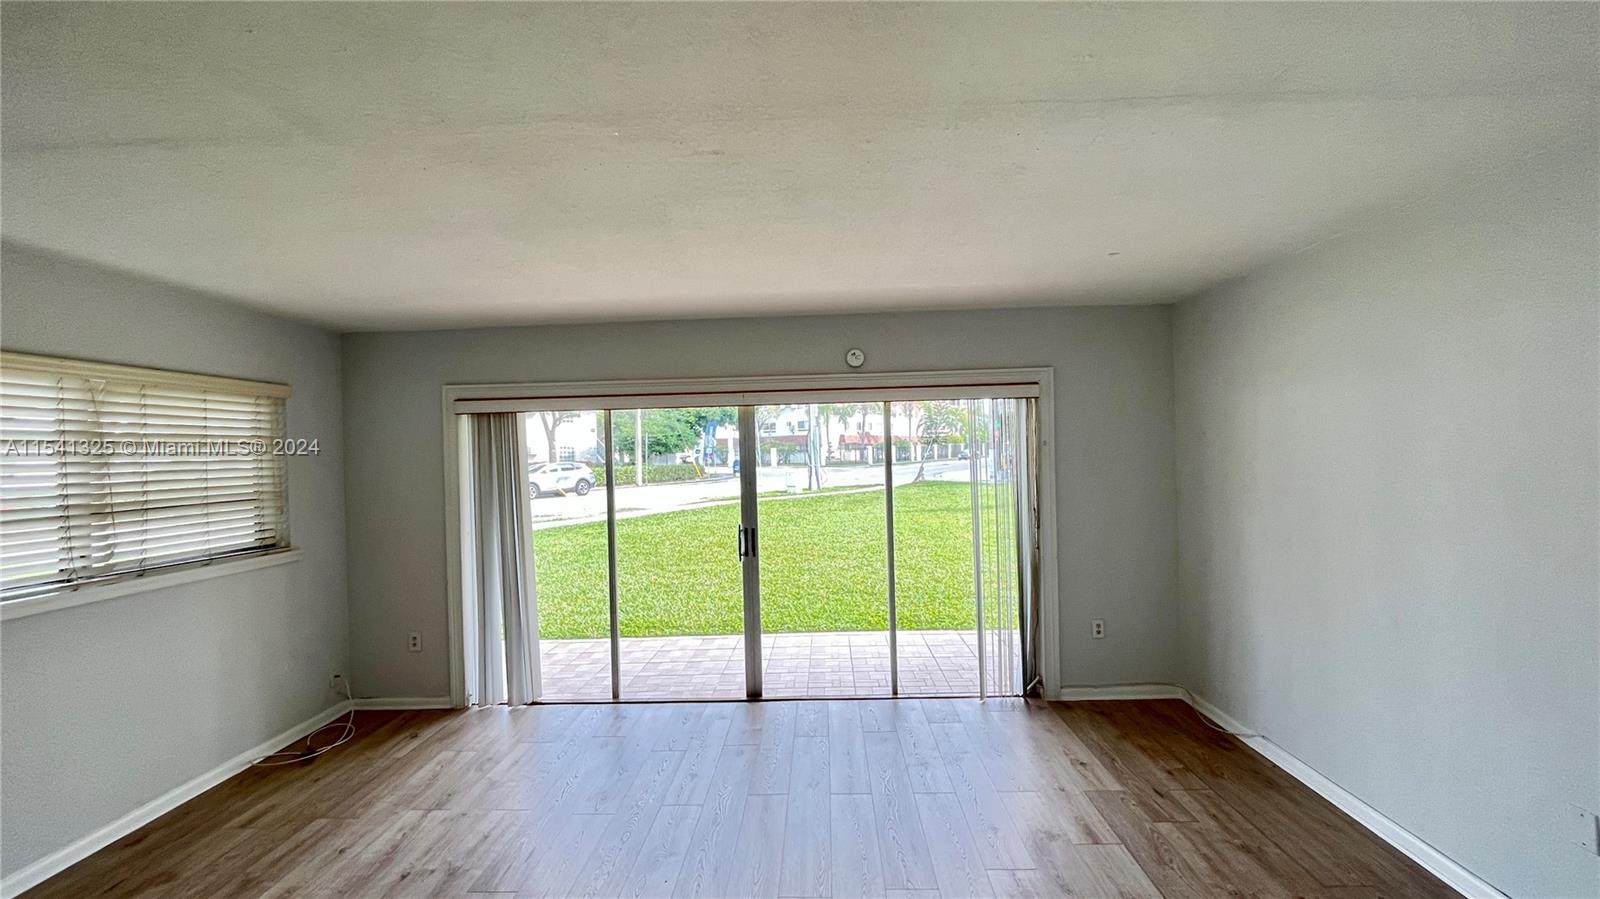 For Sale! Amazing one bedroom, one bathroom apartment in the heart of Dadeland.  Laminated wood floors and tile throughout.  Stainless steel appliances. One parking assigned. Can be rented immediately. Complex offers a swimming pool and tennis courts.  Great for investment or to live in.  Cash only.